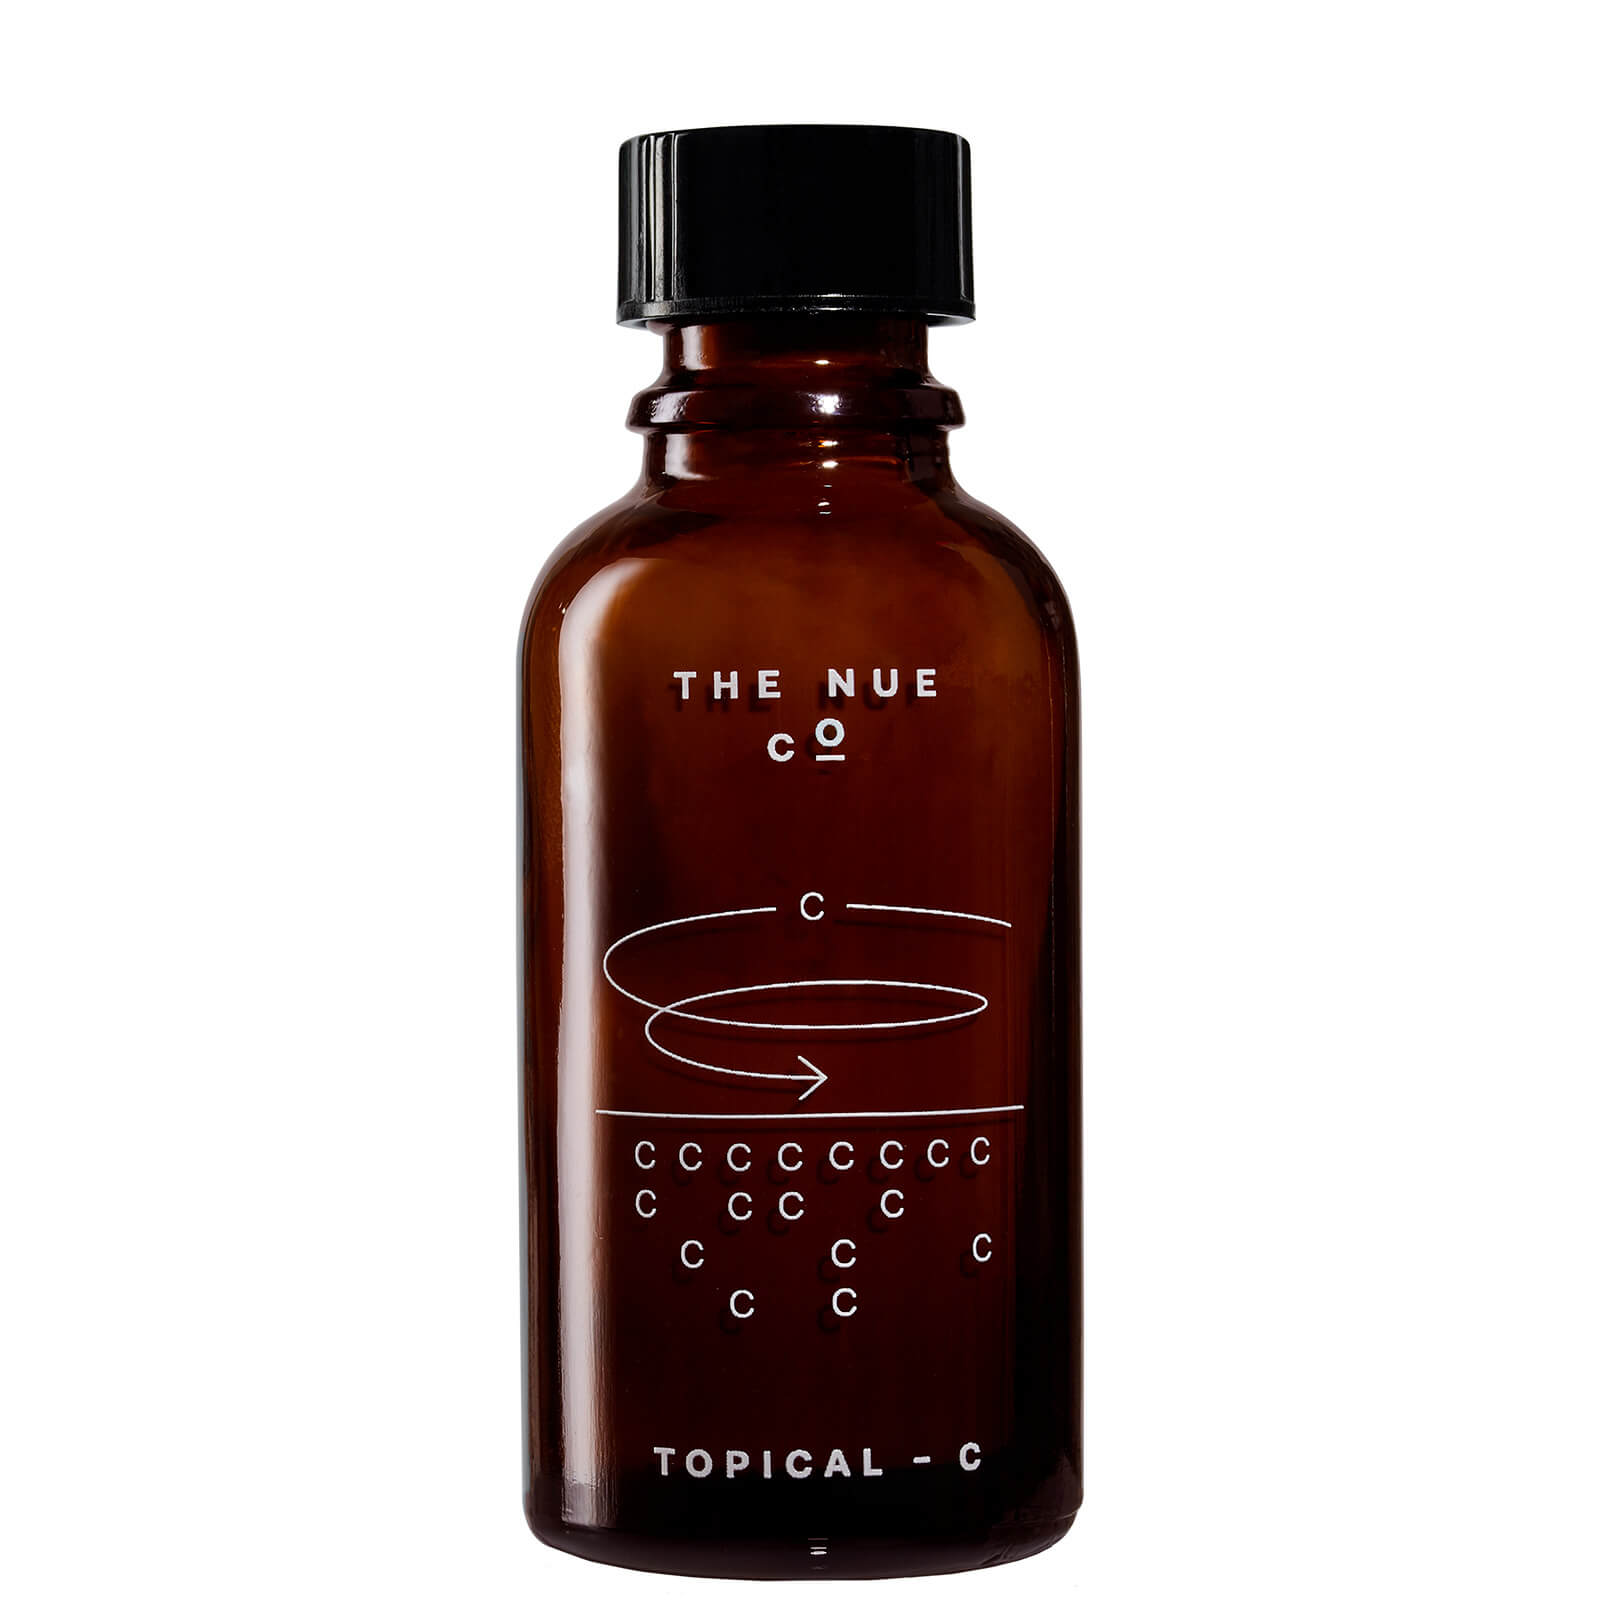 The Nue Co. Topical-c 15ml In White